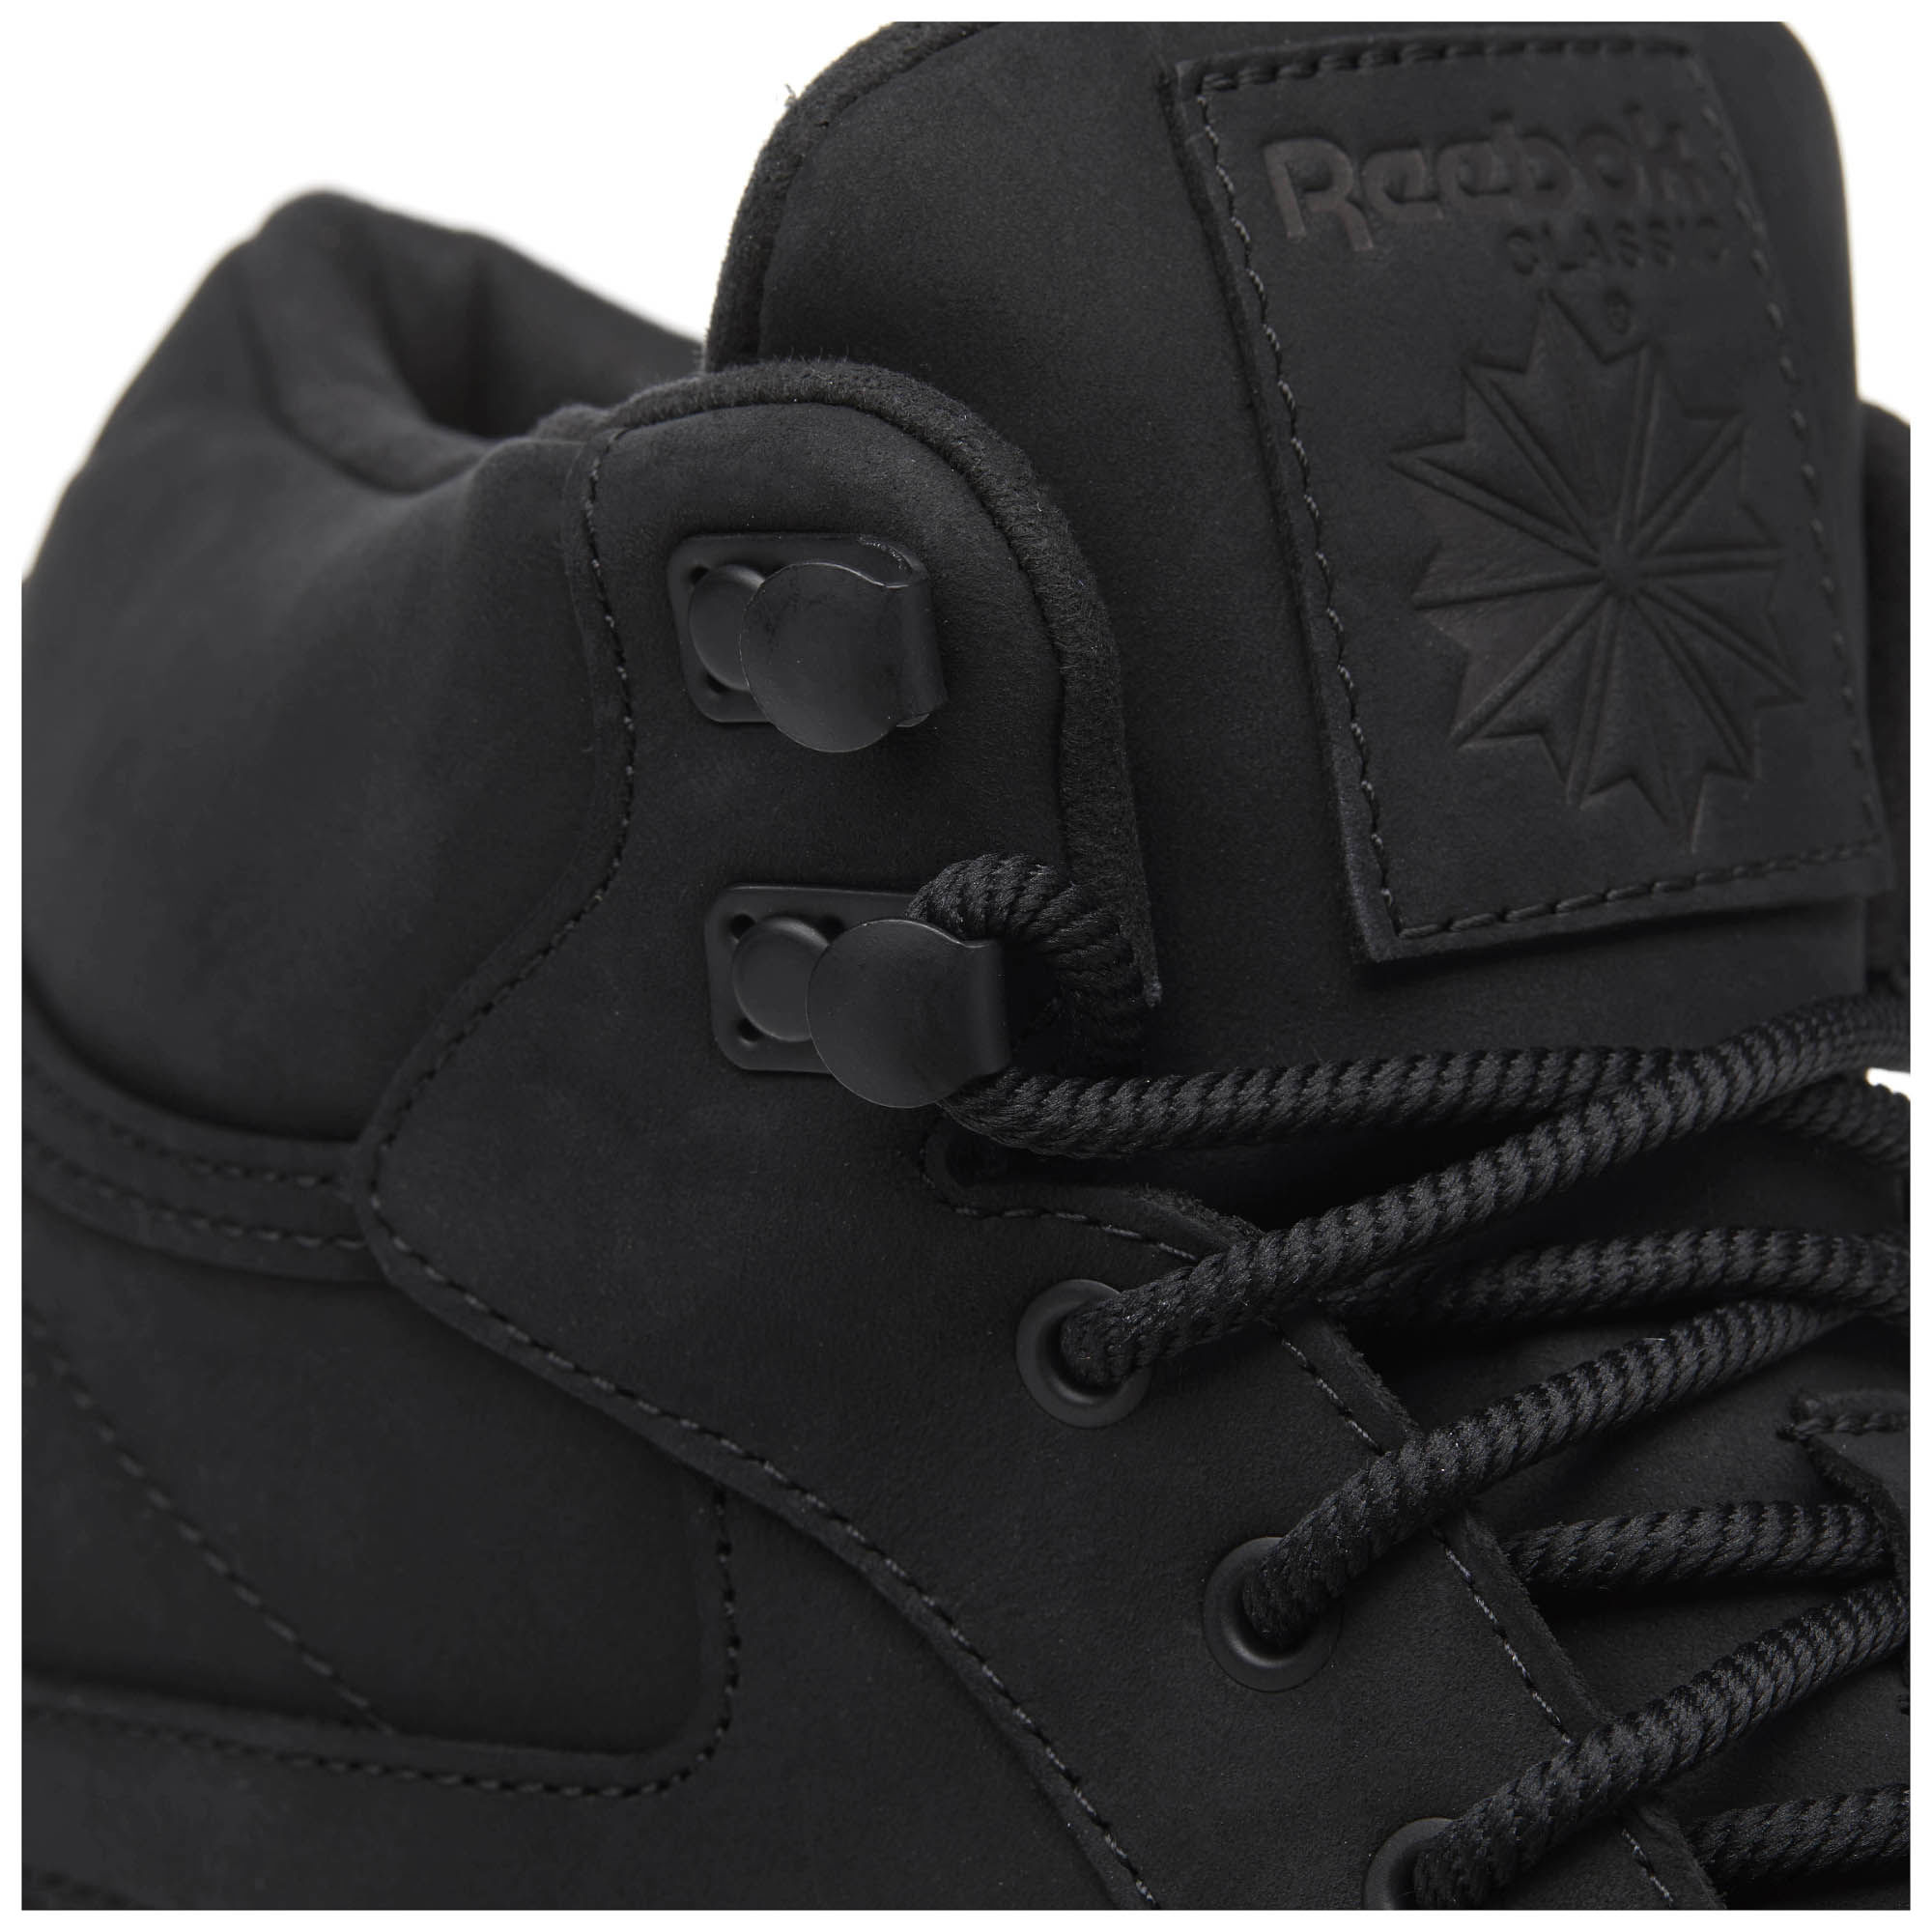 reebok classic leather mid gore-tex thinsulate black 8